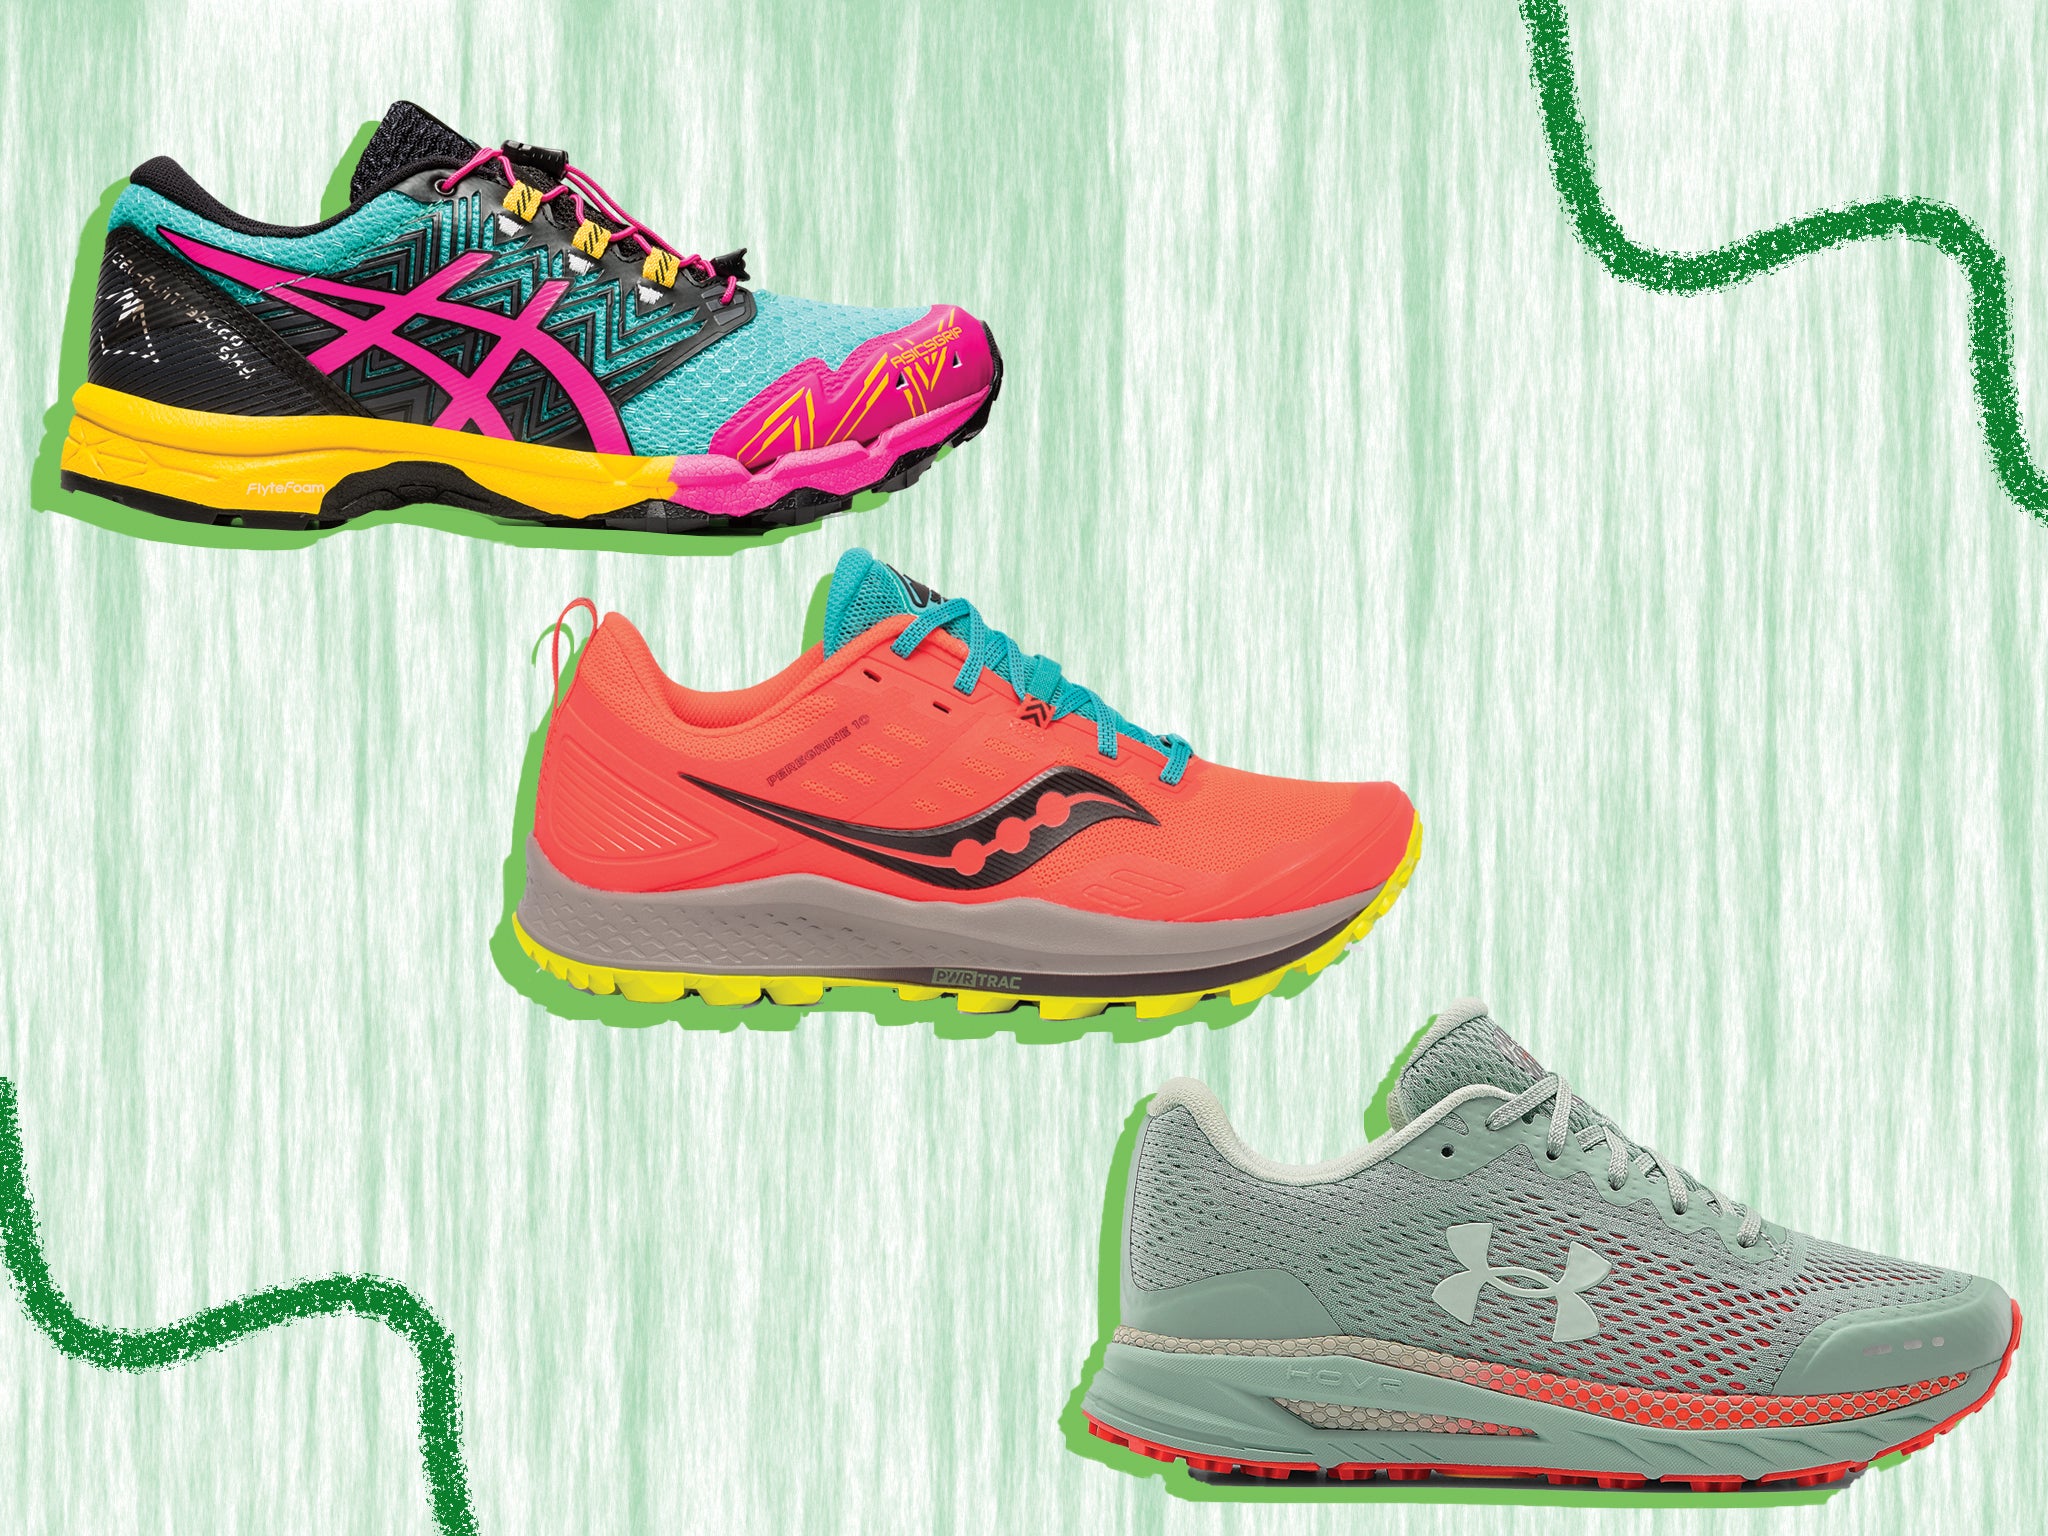 Best women's trail running shoes 2020 | The Independent